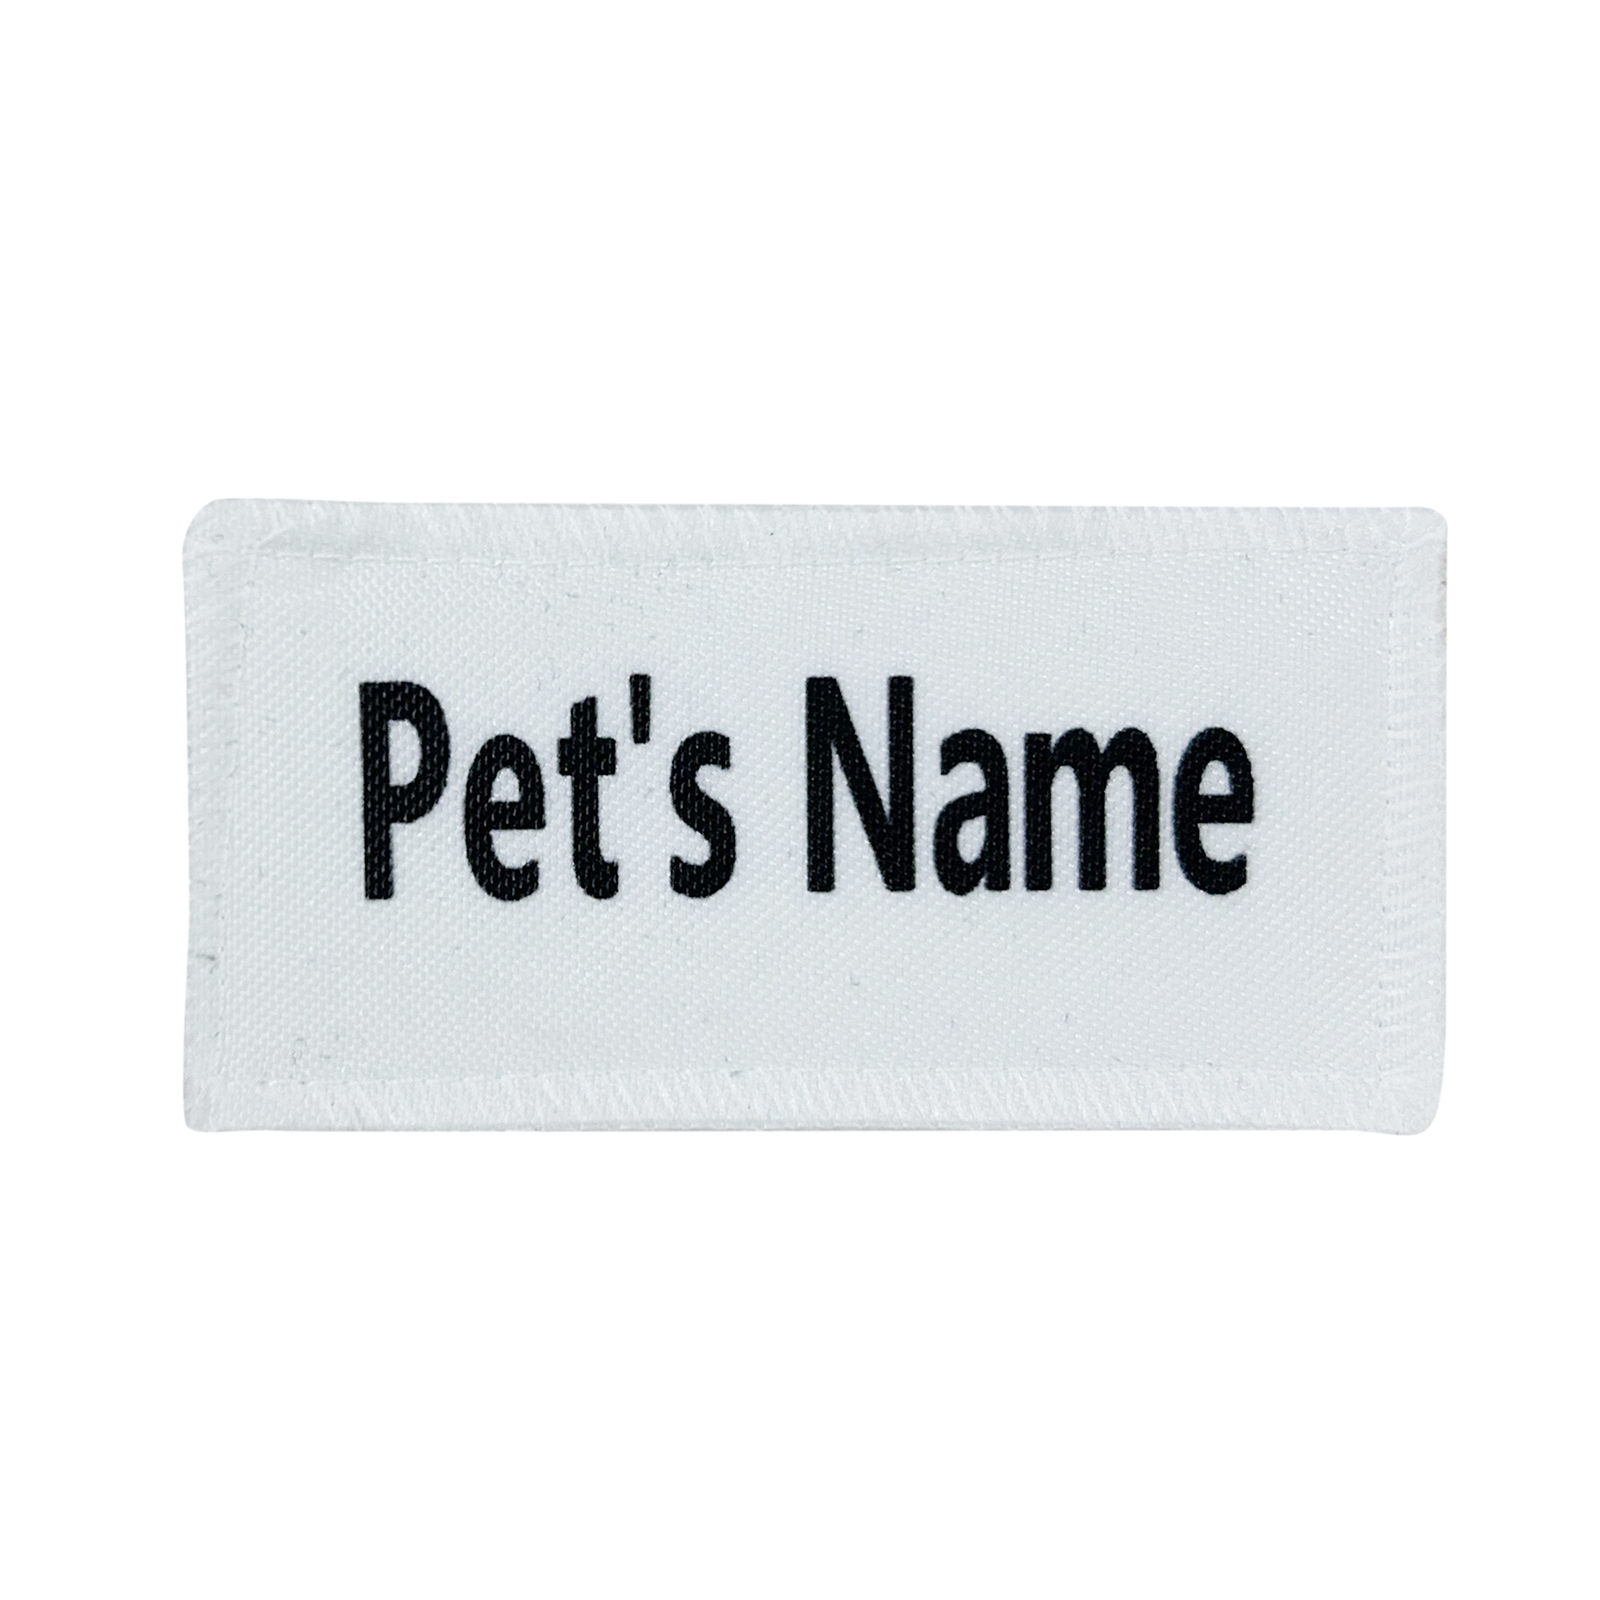 Muka 1 Pcs Custom Name Patch, Personalized Golf Caddie Uniform Name Badge,  with Hook and Loop Sale, Reviews. - Opentip